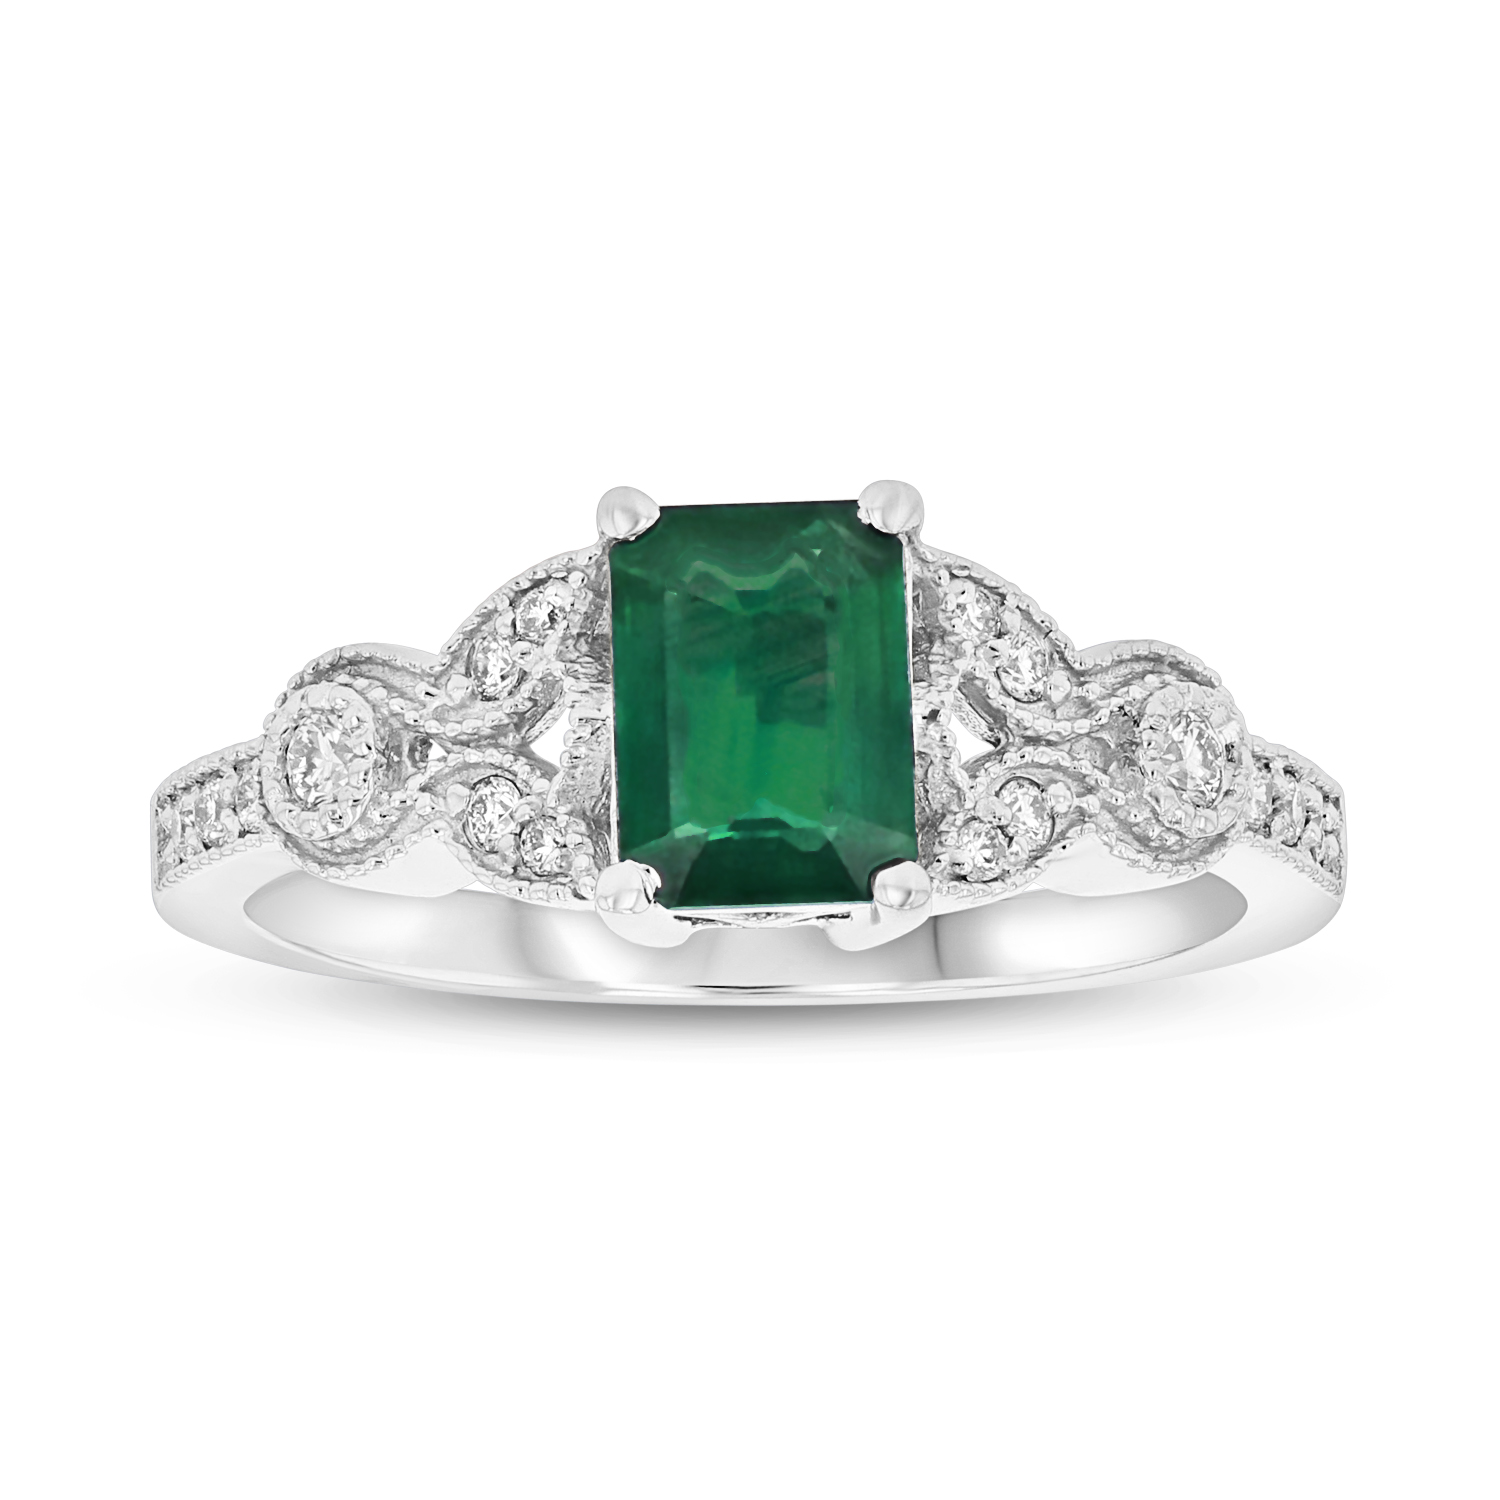 View 1.05ctw Diamond and Emerald Engagement Ring in 14k White Gold